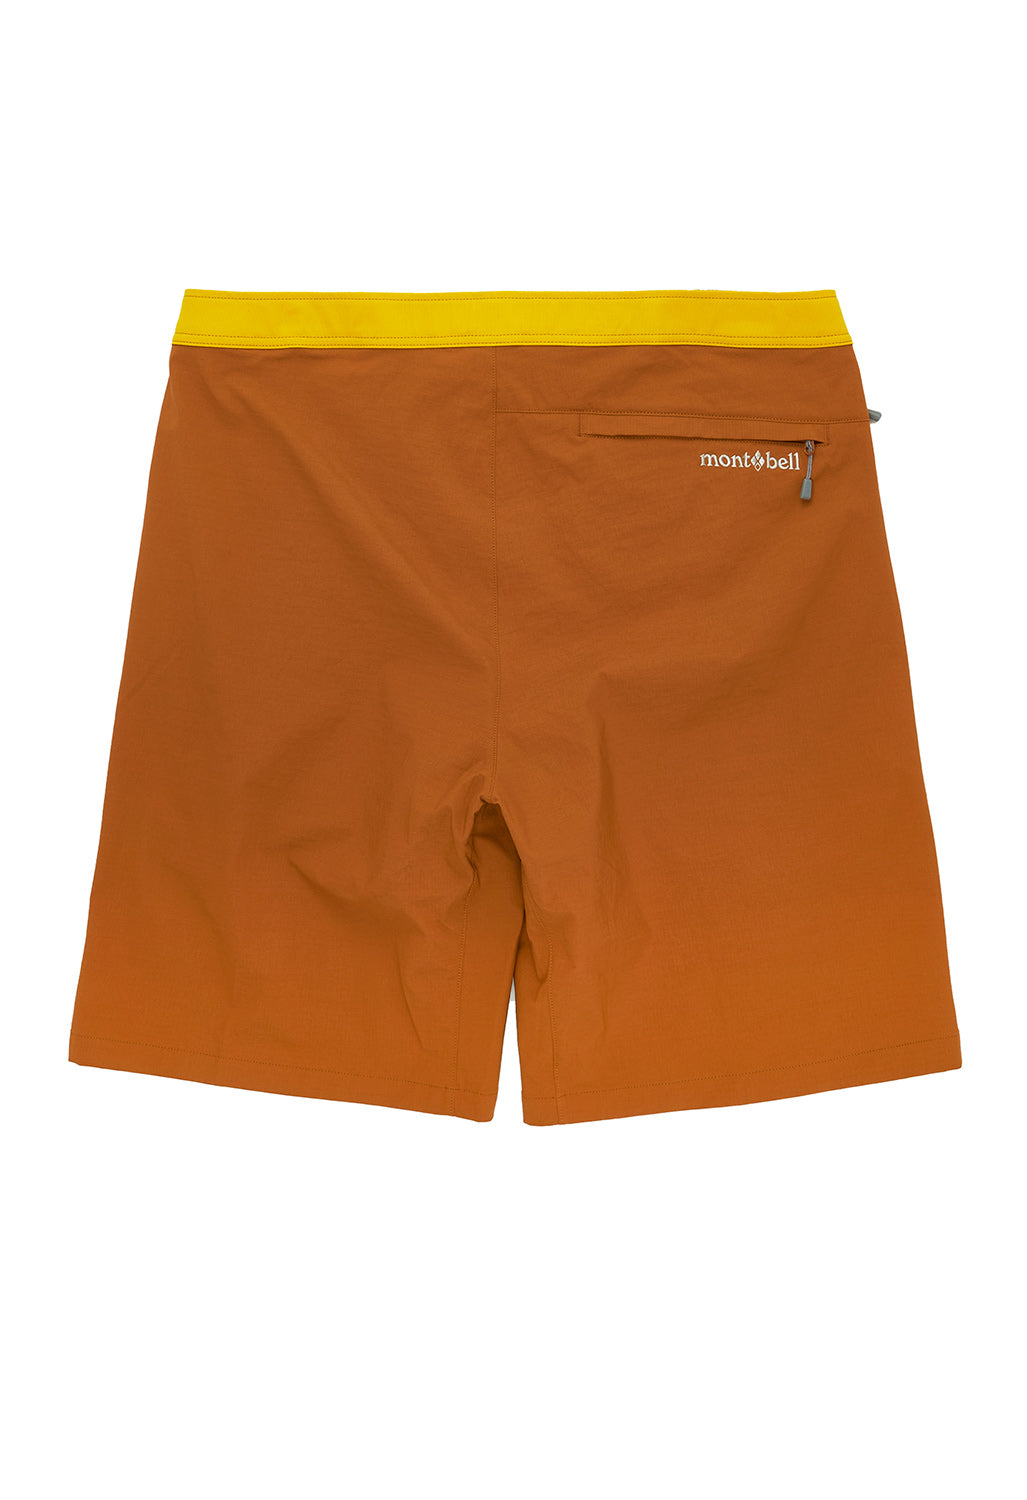 Montbell Men's Canyon Shorts - Yellow